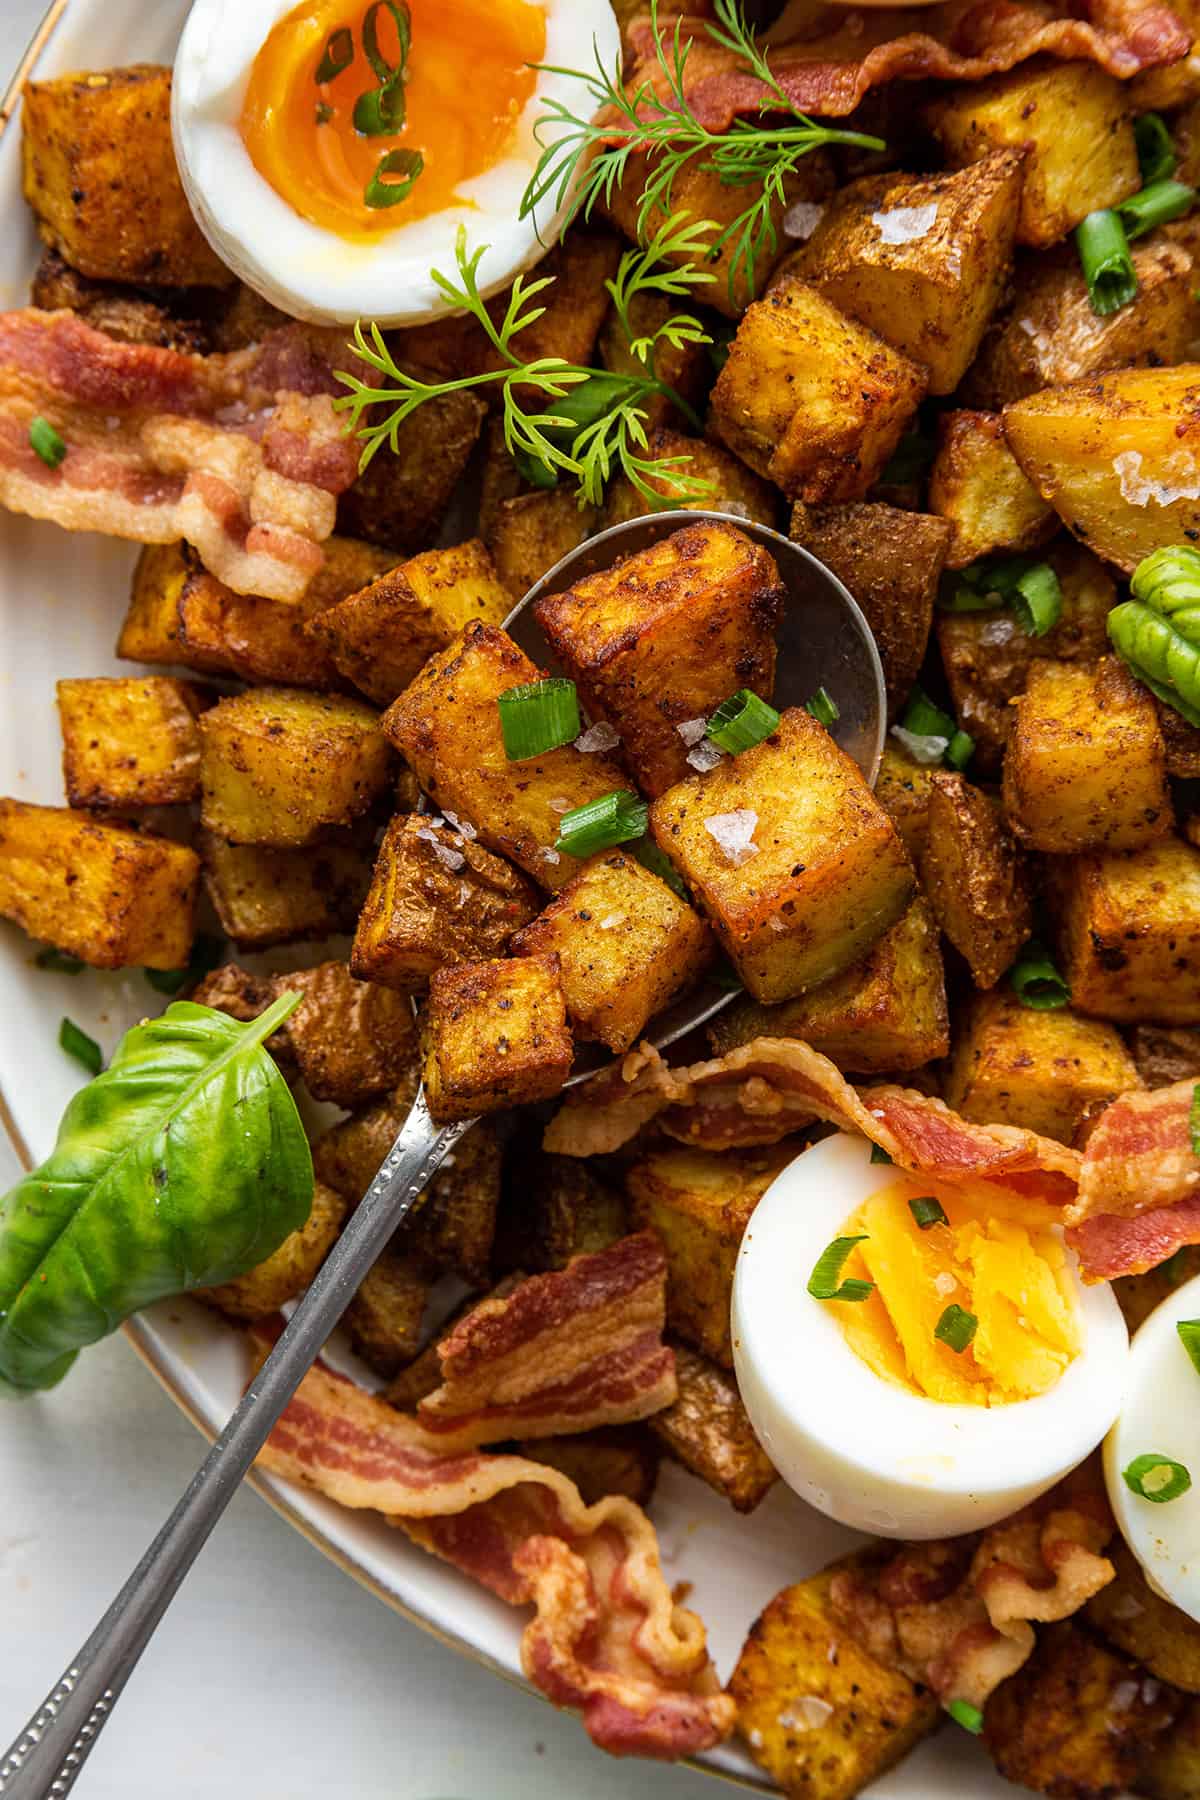 A spoon with a spoonful of roasted potatoes, on top of a plate full of potatoes, soft boiled eggs, and bacon.